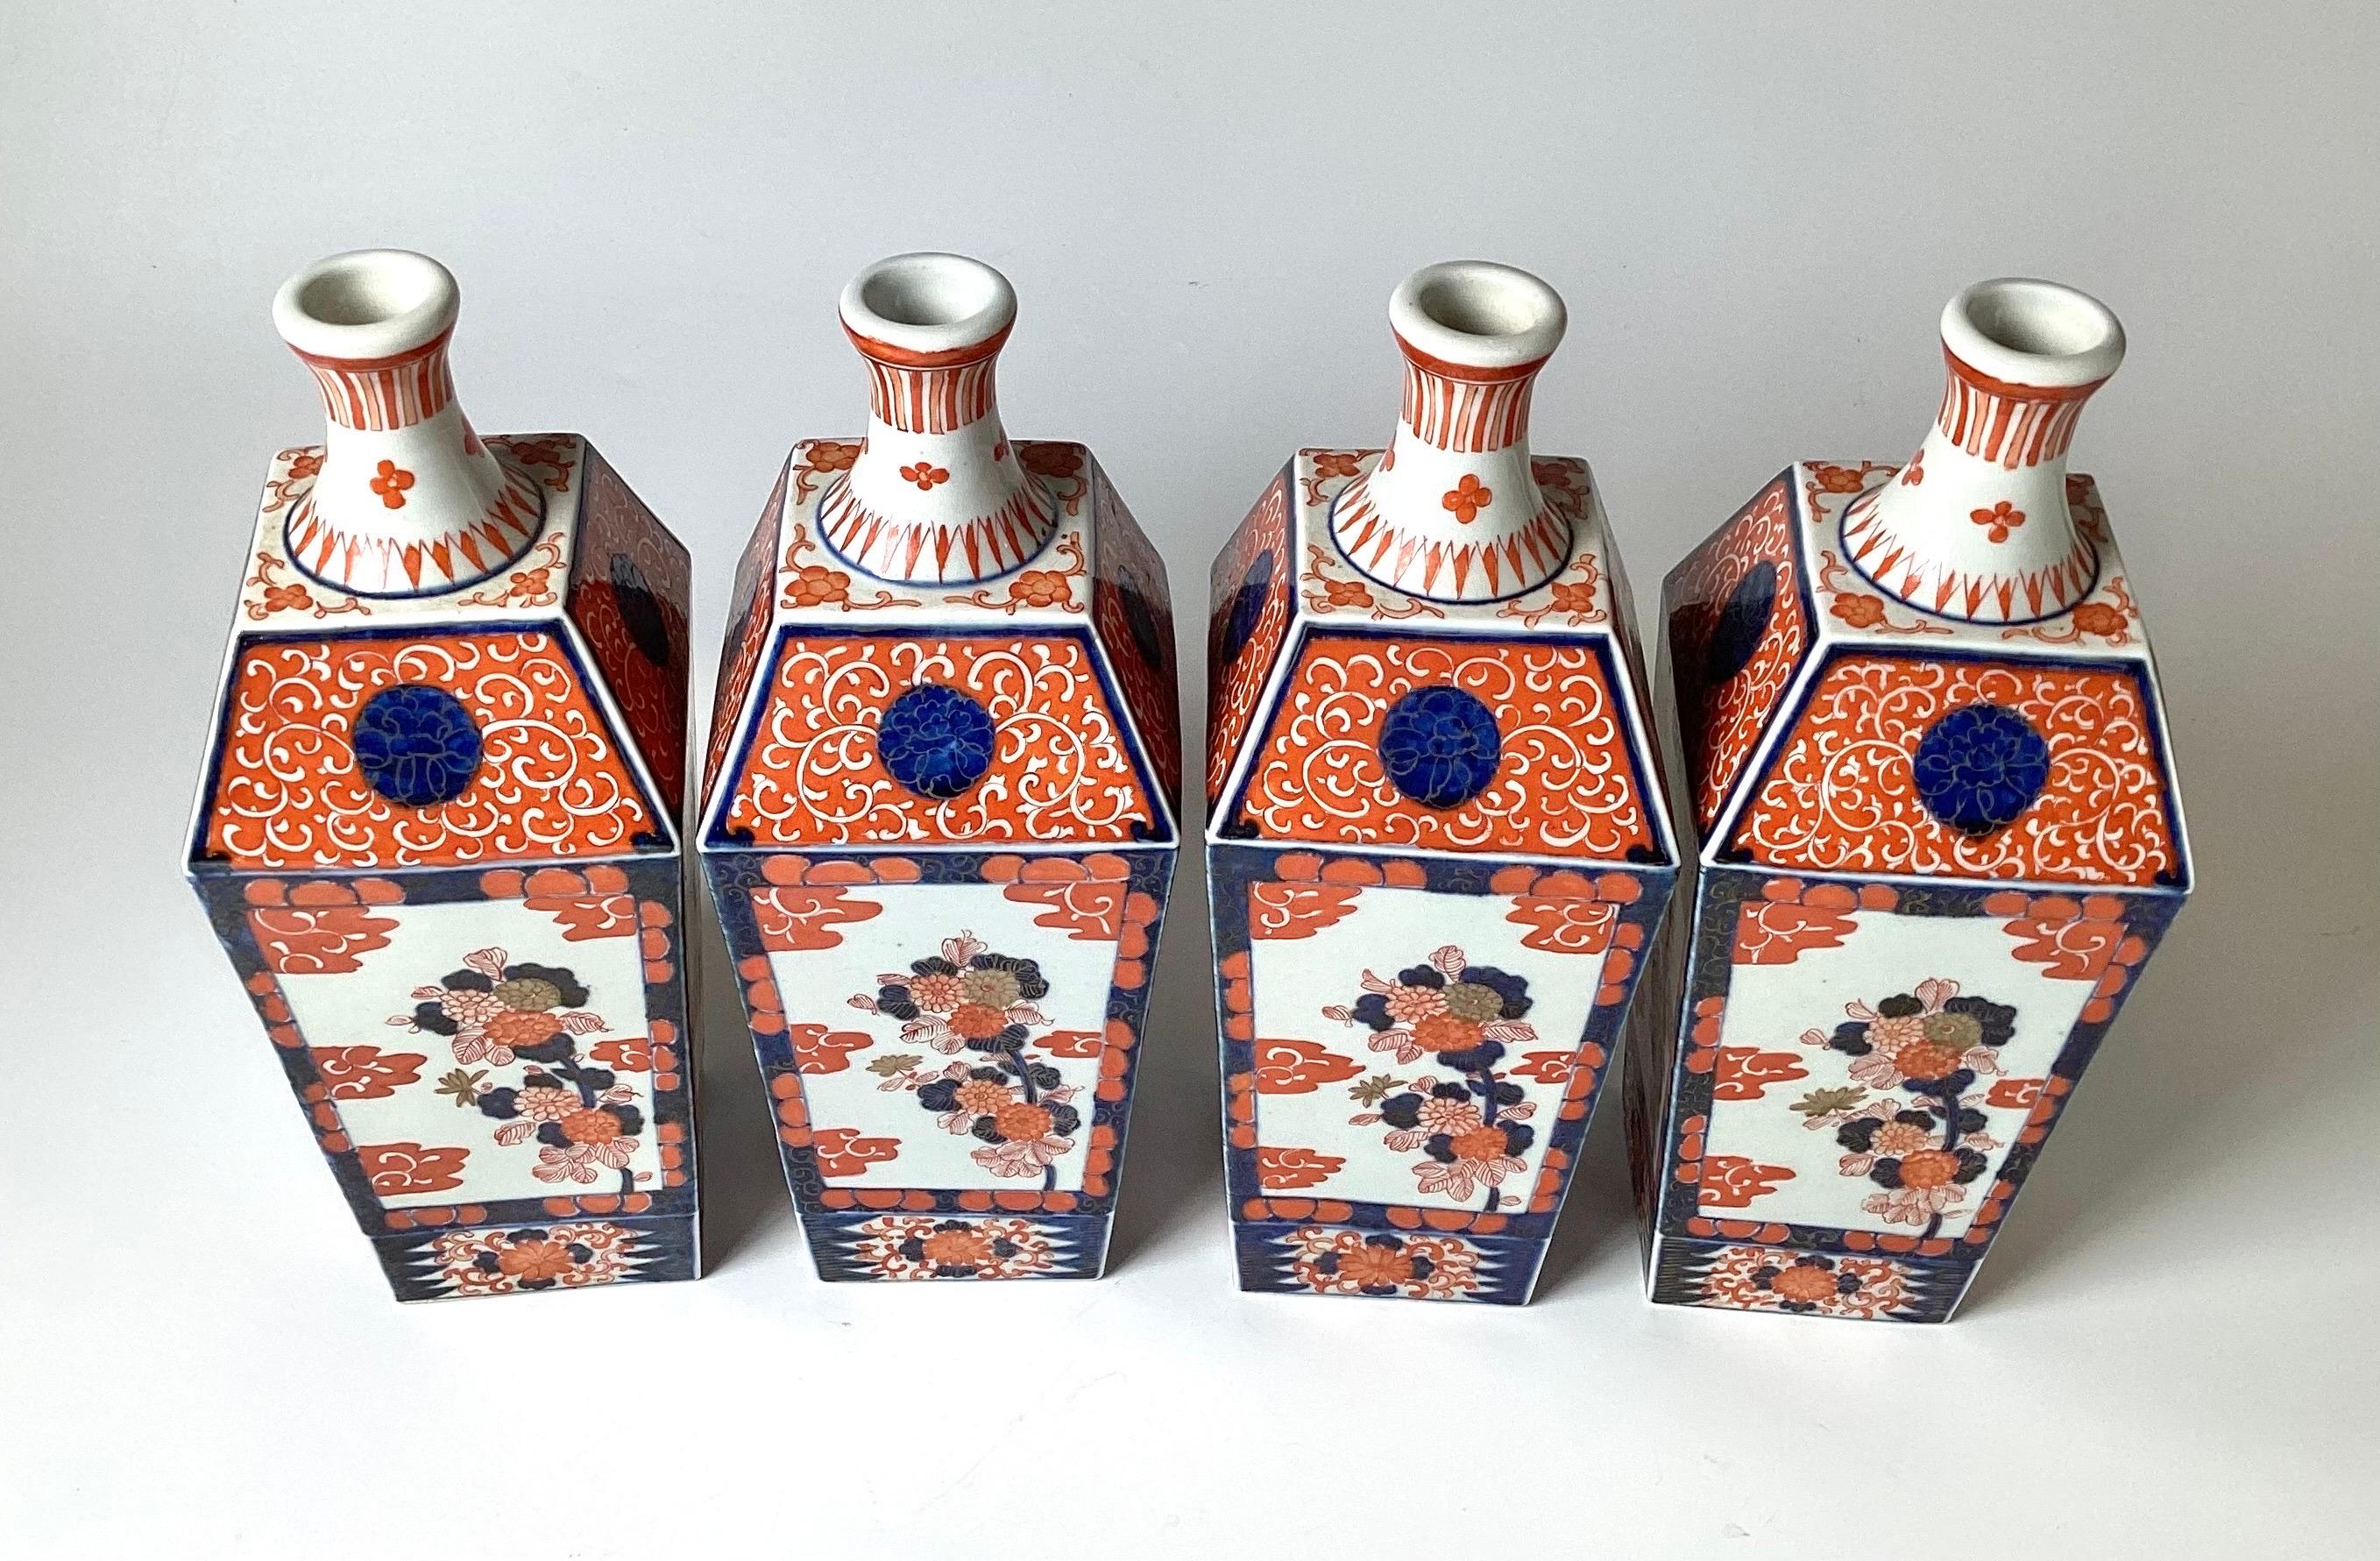 A rare set of four hand painted Japanese porcelain Imari bottle form vases. The vases of square tapering form with classic Imari iron red and cobalt blue decoration on white glazed porcelain. These are signed with a blue mark on the bottoms, in